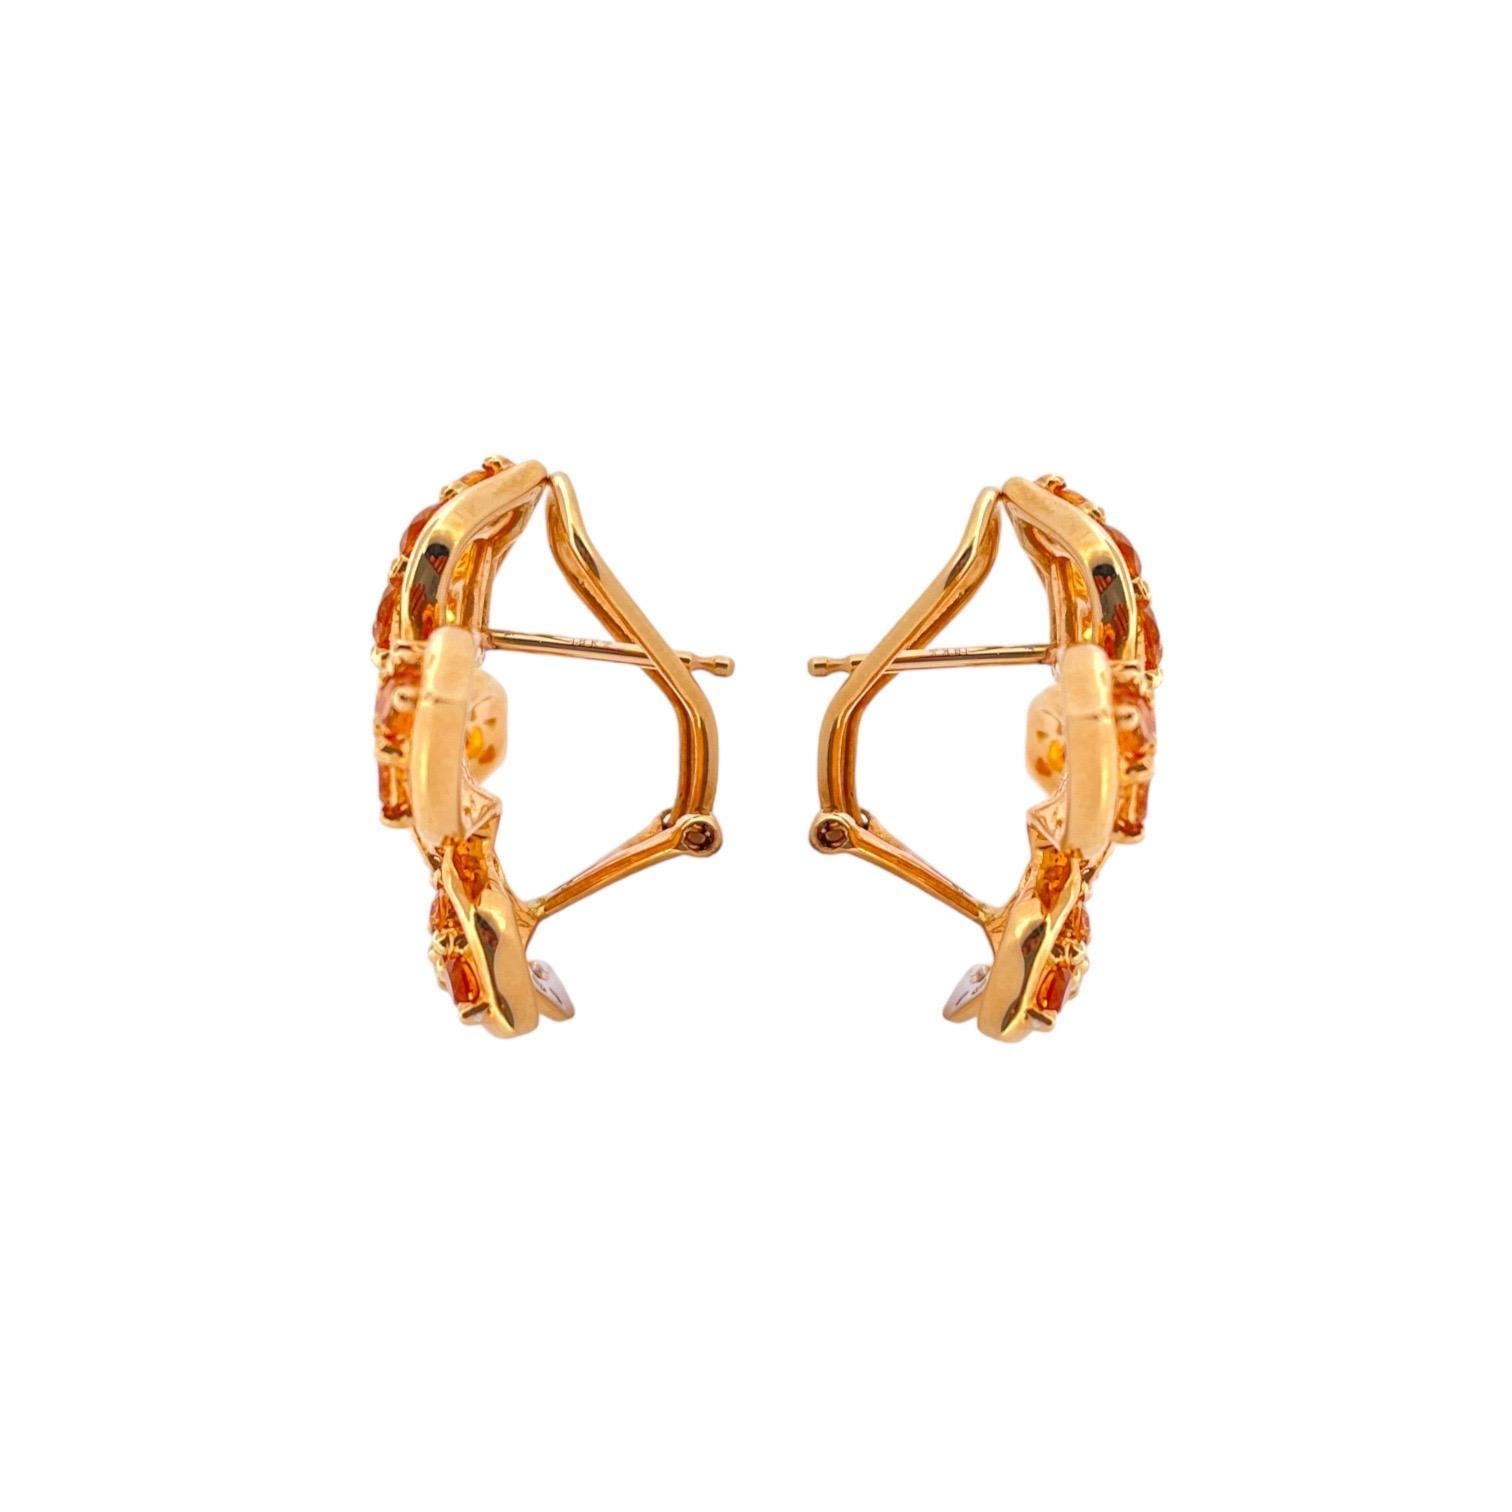 Retro Natural Citrine Leaf Earrings - 0.10 TCW, 18K Yellow Gold For Sale